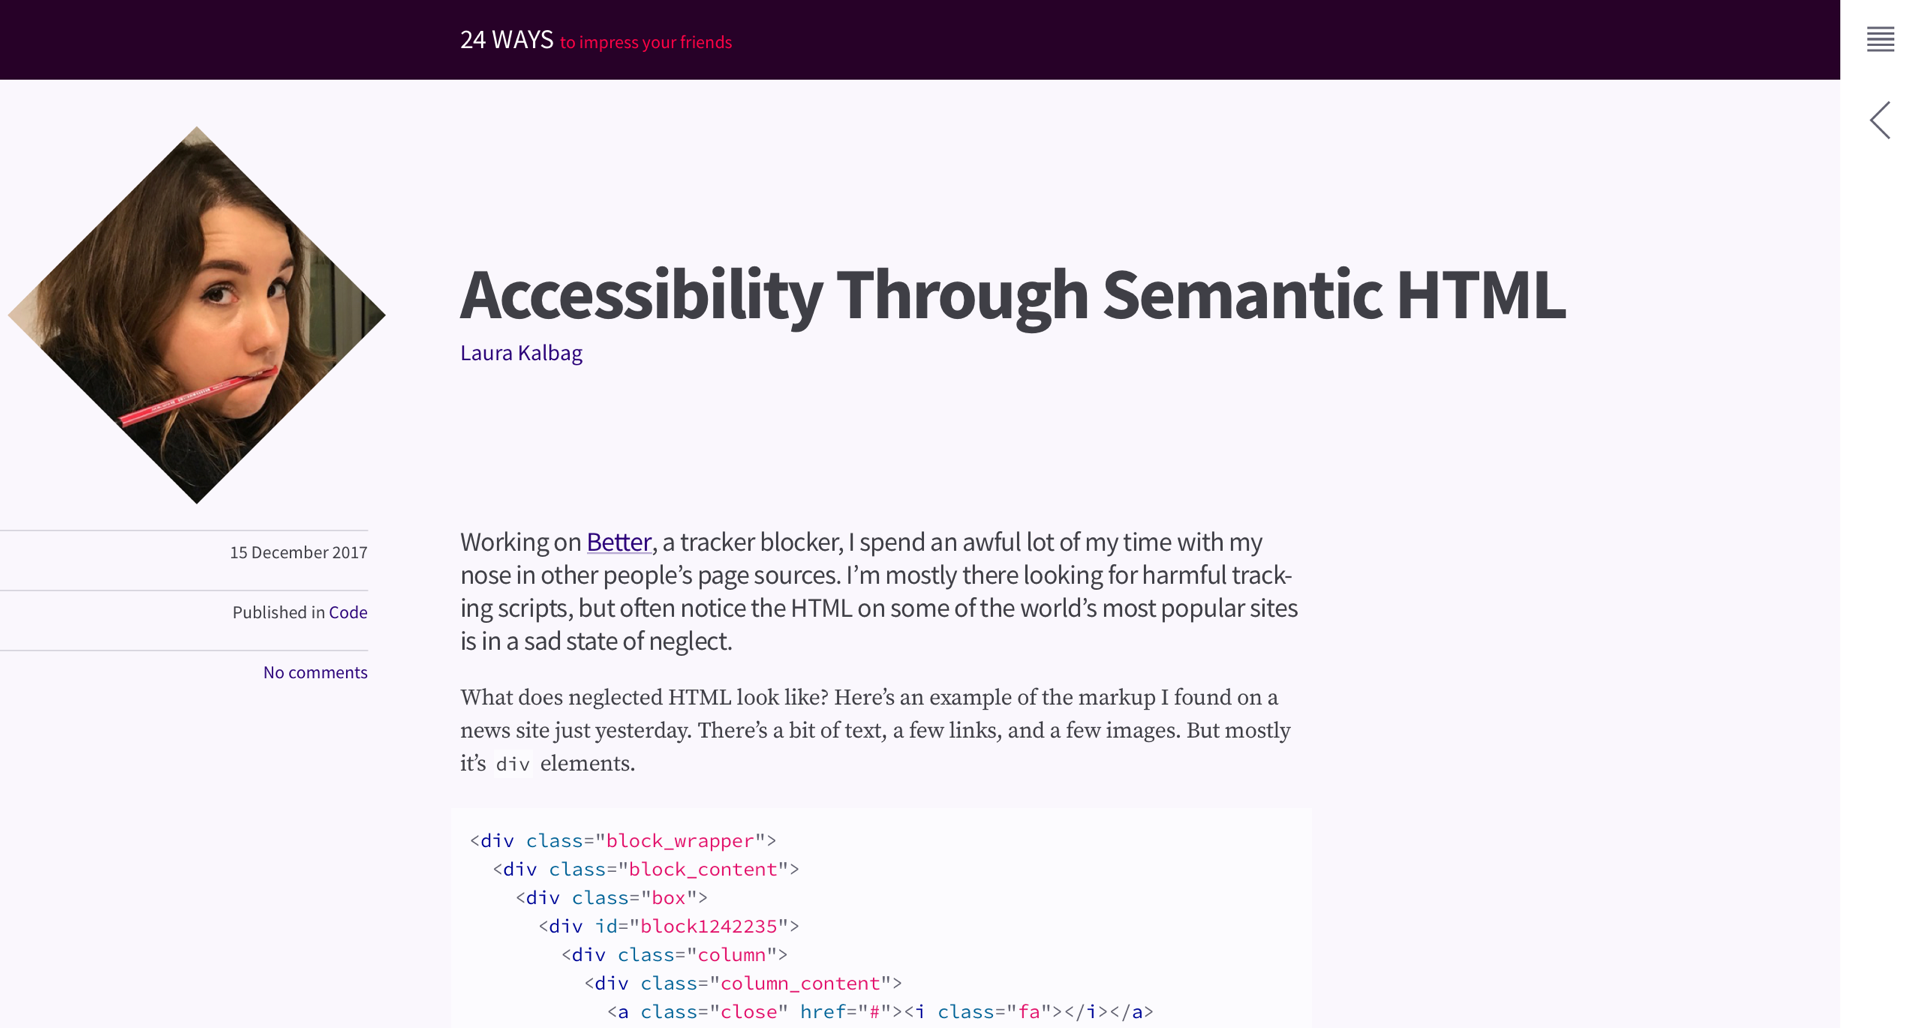 Screenshot of the article on 24ways including the title “Accessibility Through Semantic HTML” and an avatar of me with a pen in my mouth.